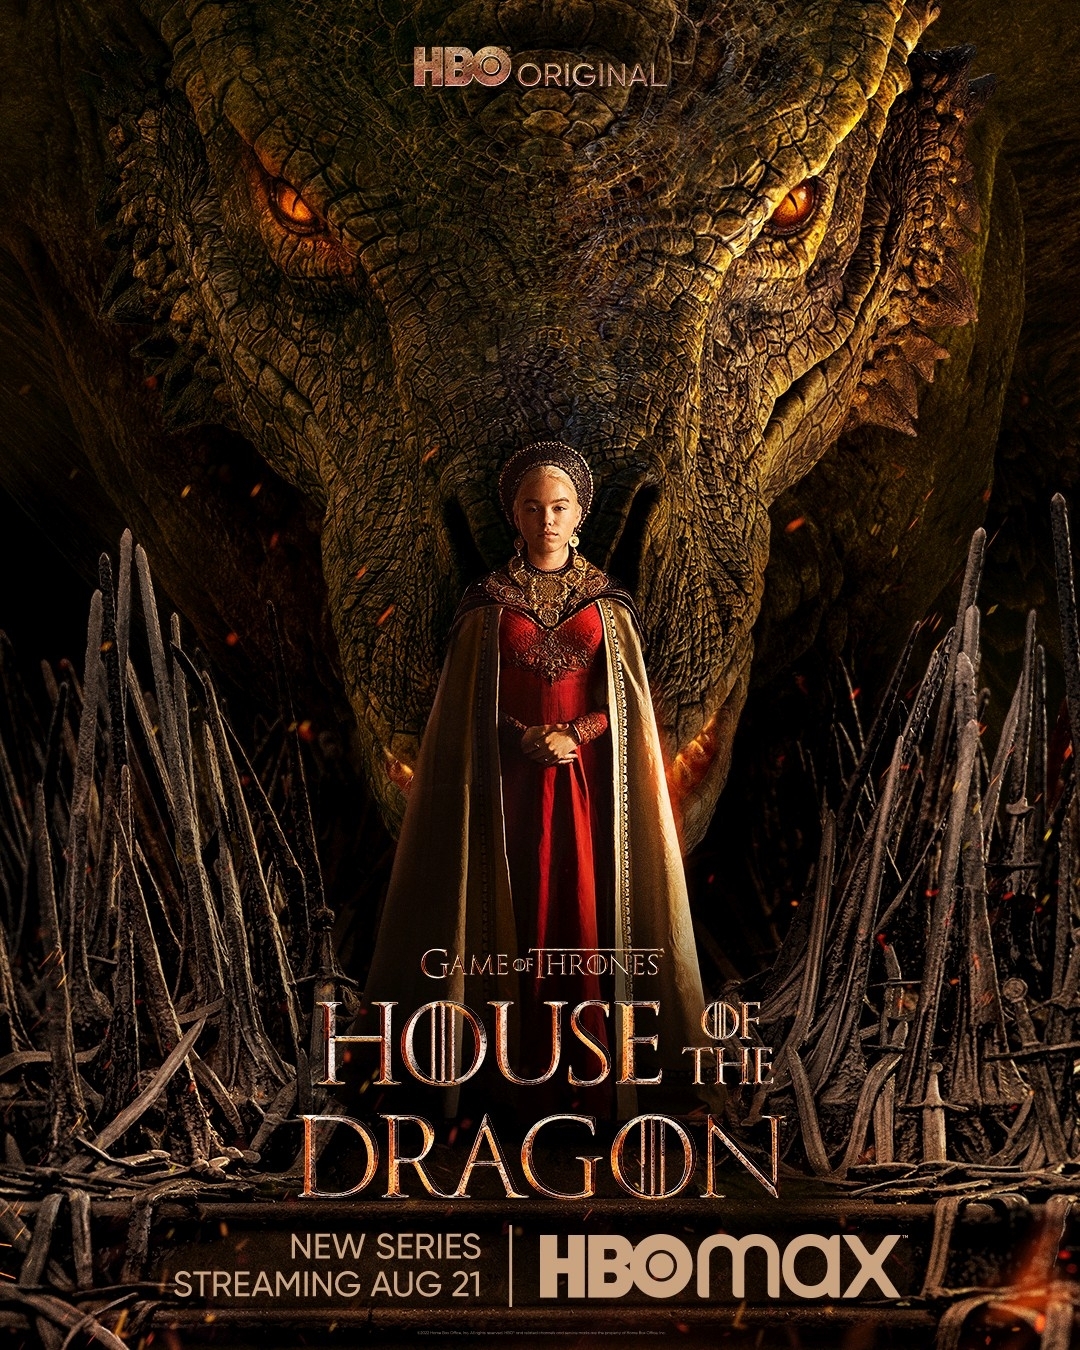 House of the Dragon Schedule: Here's When New Episodes Drop